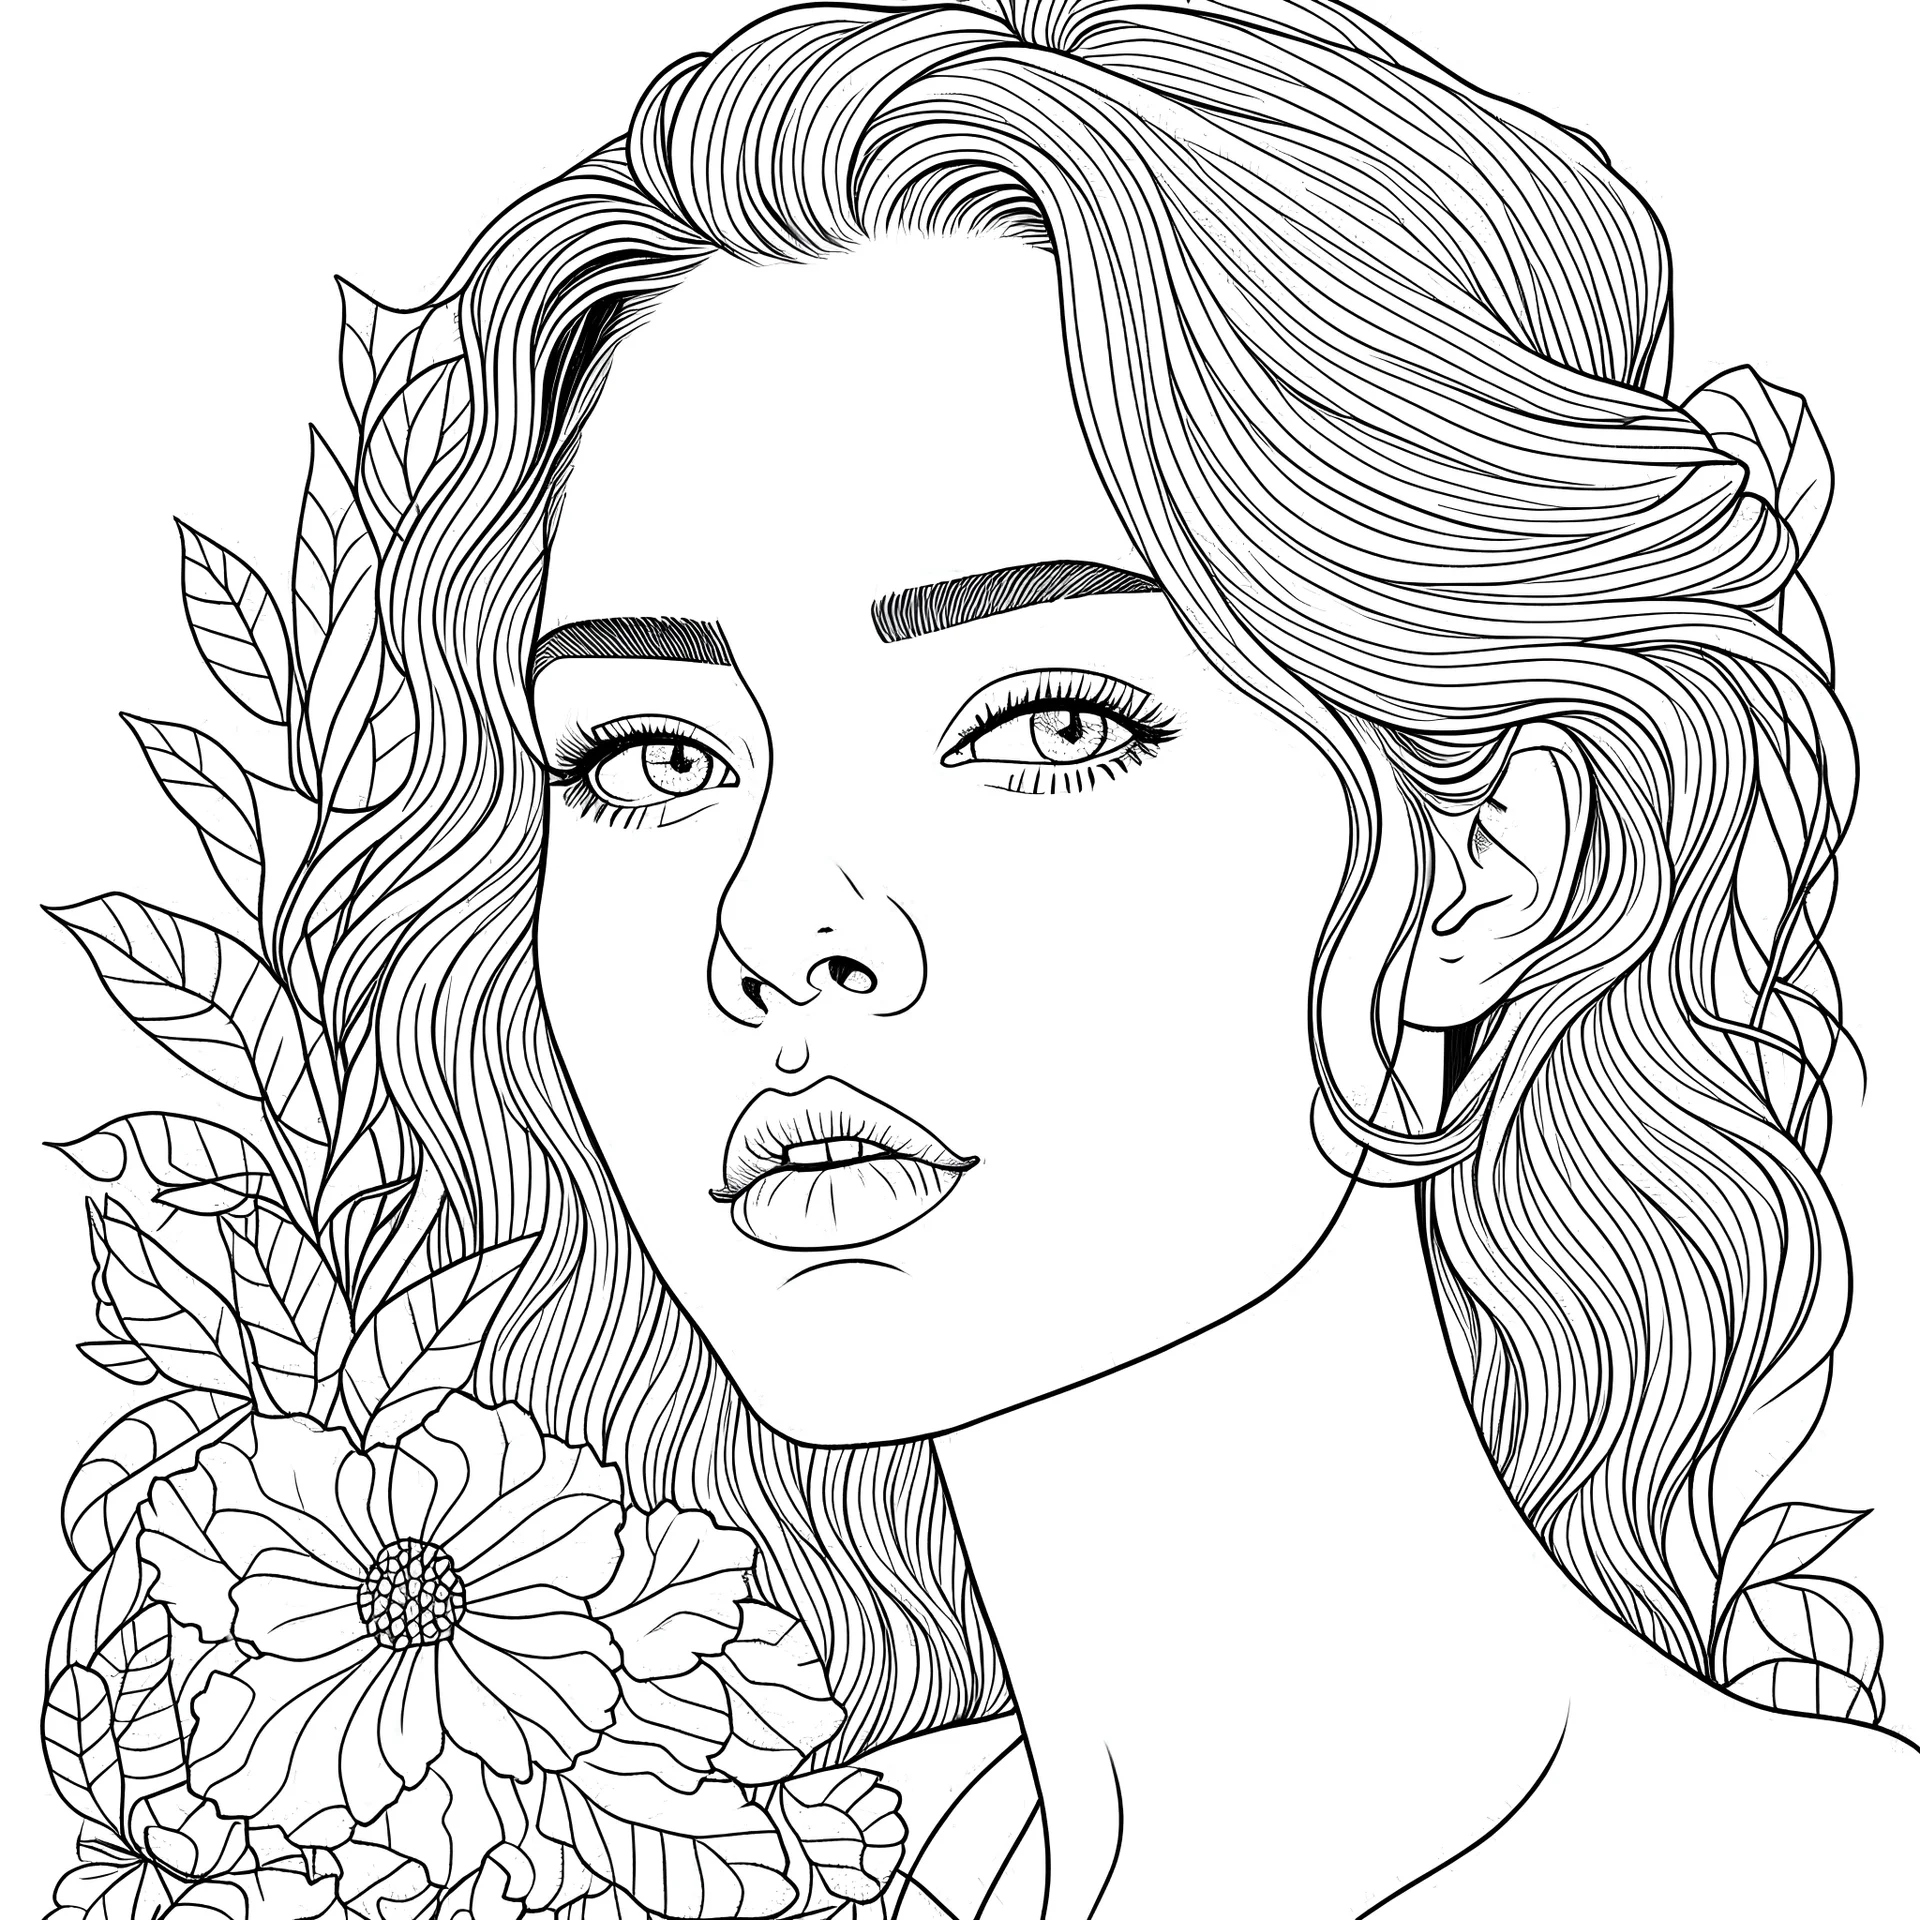 floral, full view, realistic face, coloring page, only draw lines, coloring book, clean line art, –no sketch, color, –ar 3:4, white background, minimalistic black lines, minimal black color, low level black colors, coloring page, avoid thick black colors, thin black line art, avoid colors, perfect shape, perfect clear lines,